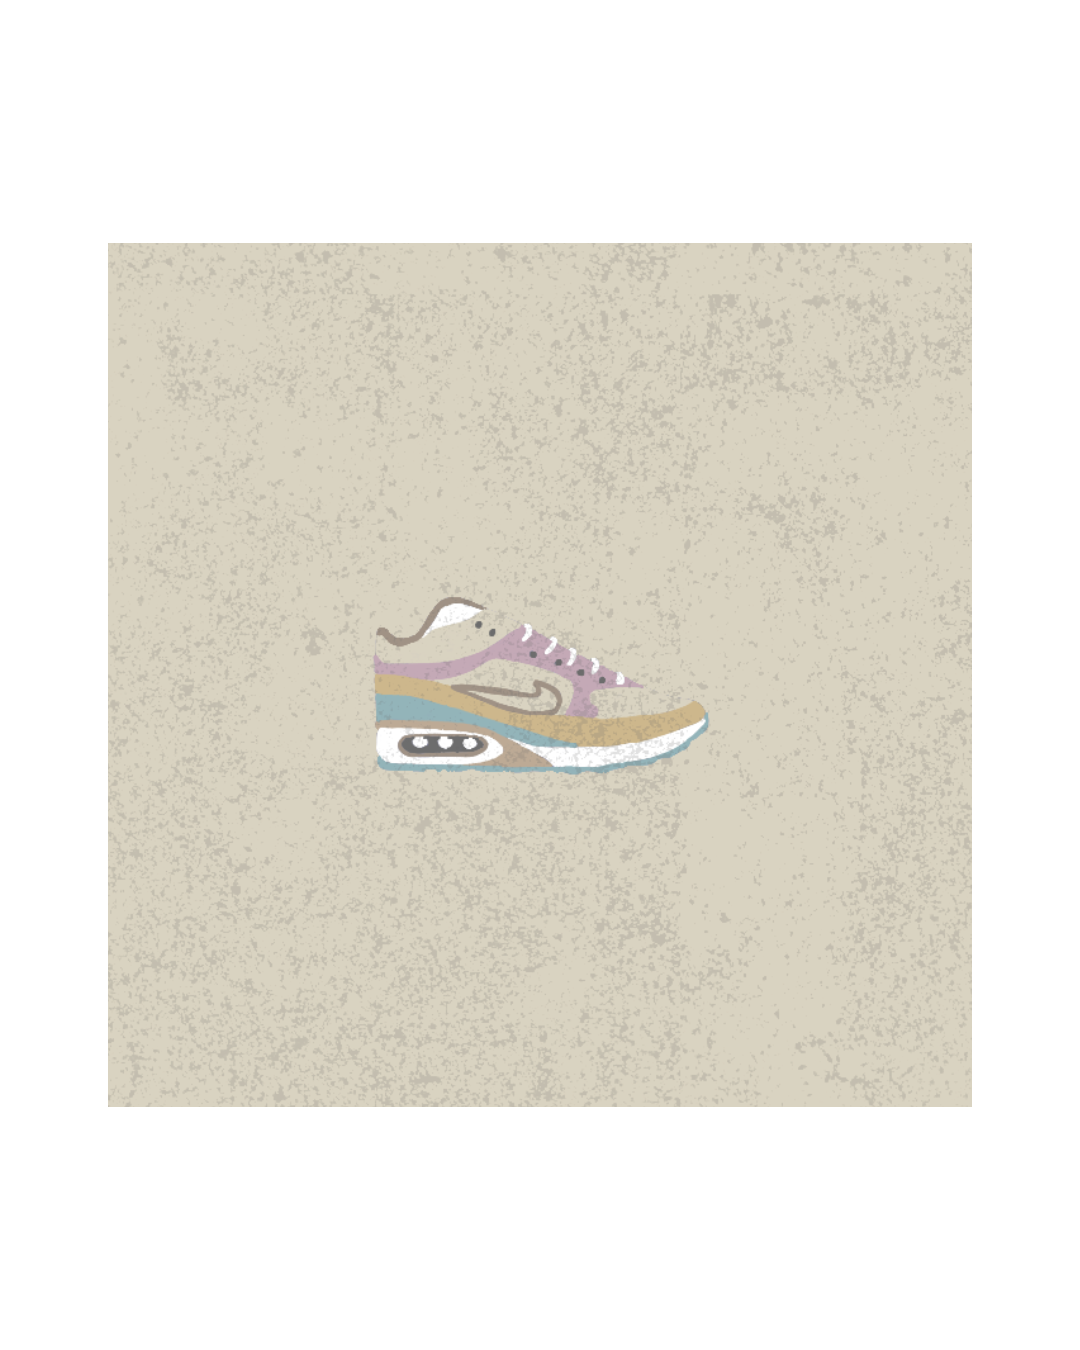 Nike shoes sneakers sports design visual identity brand identity CLIP STUDIO PAINT nikeshoes